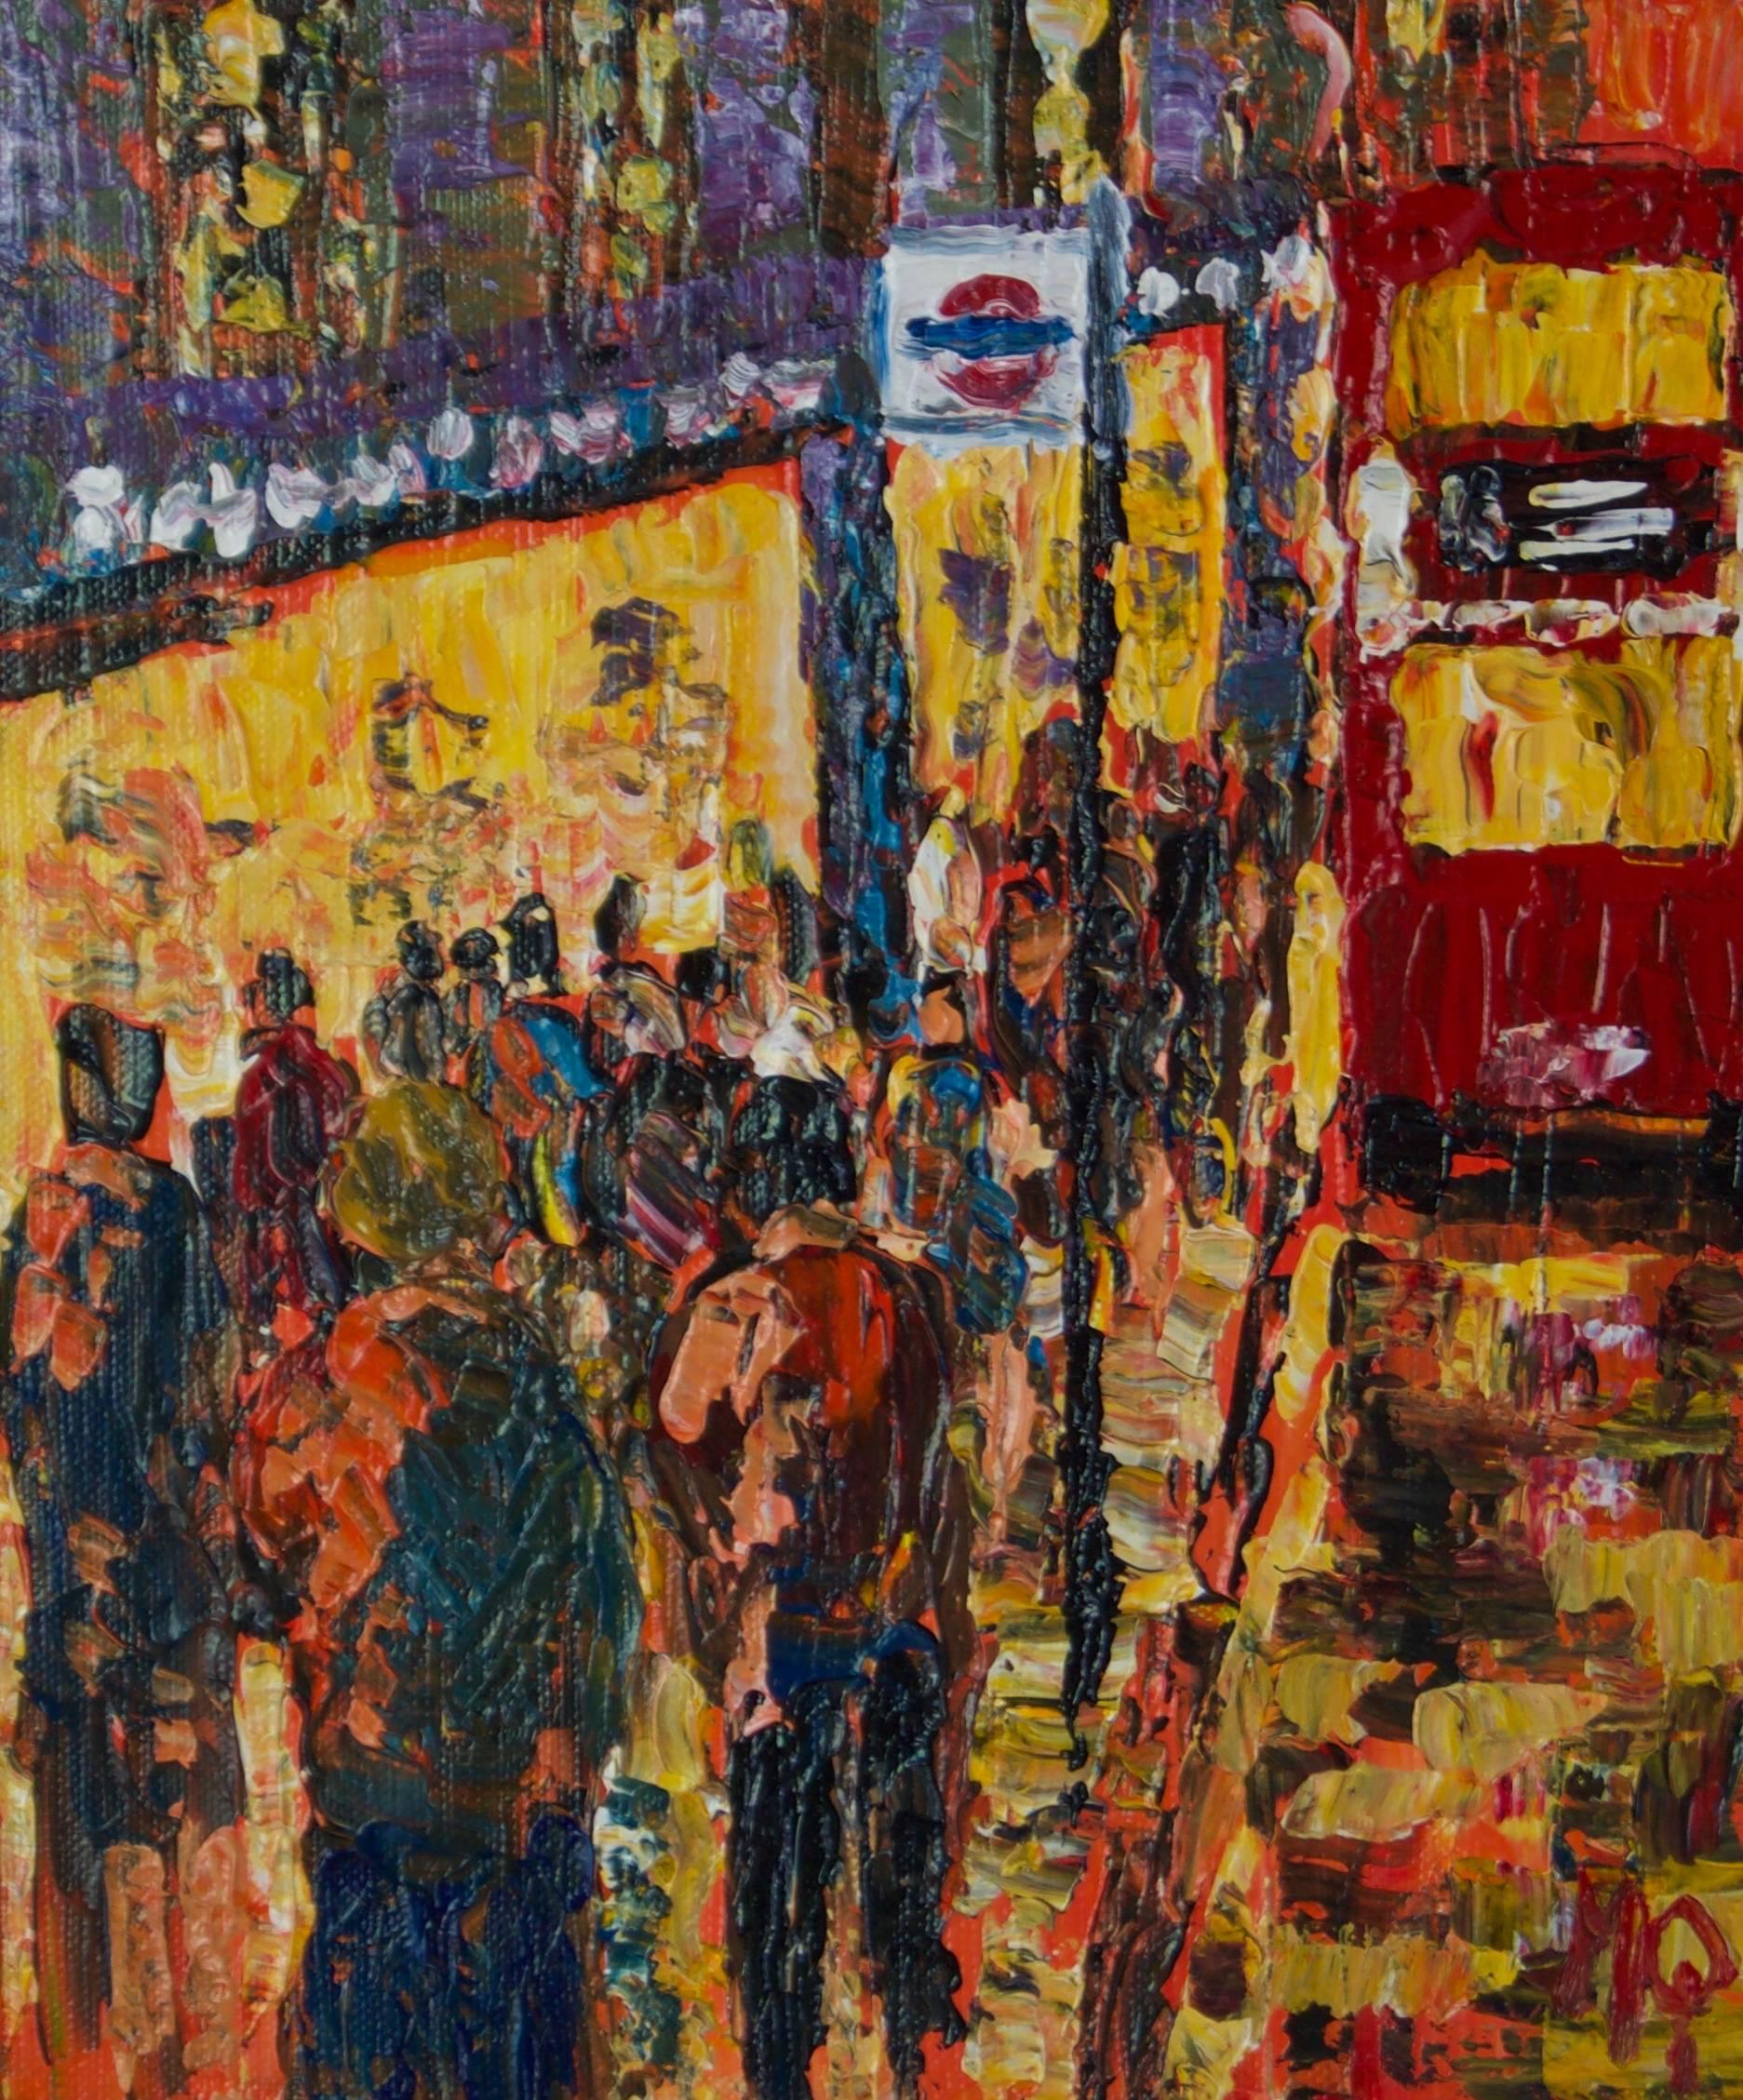 Michael Quirke Landscape Painting - London High Street - Late 20th Century Impressionist Acrylic of Bus Stop Quirke